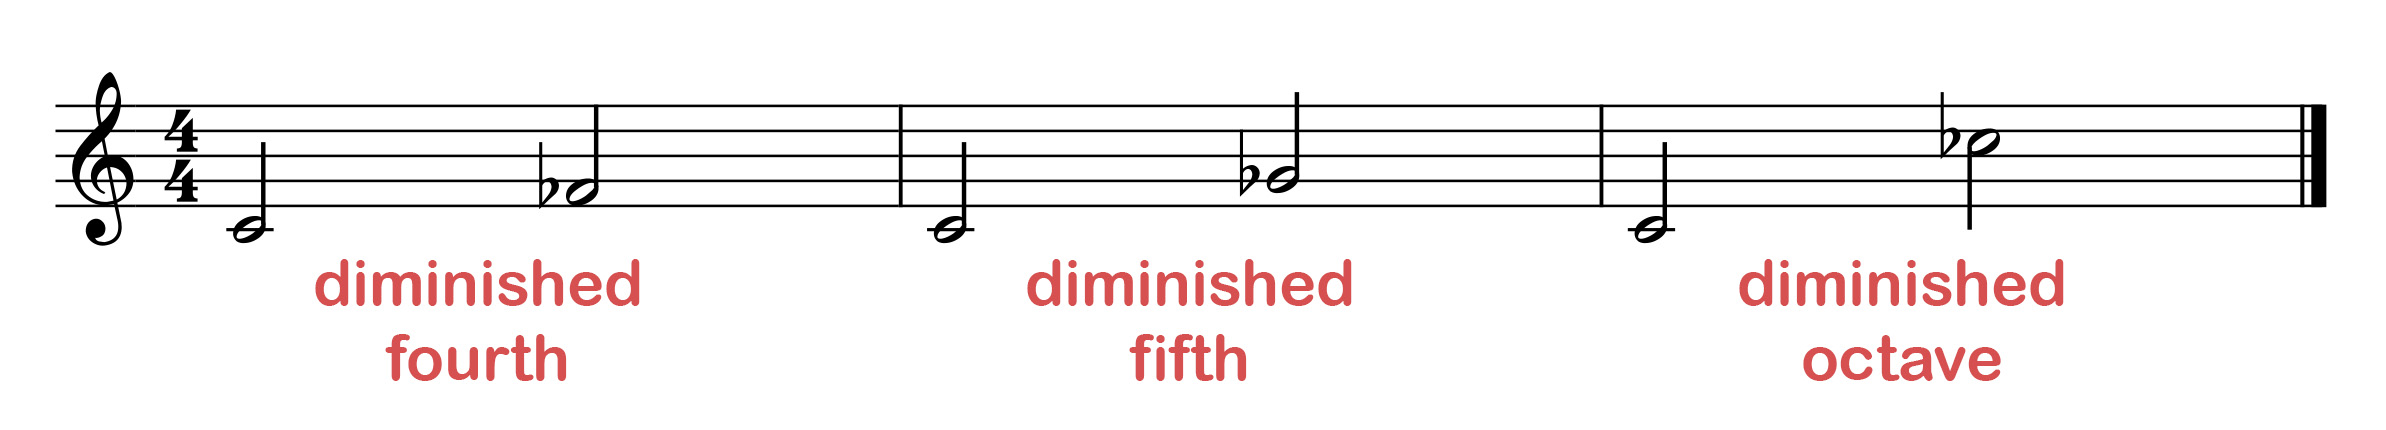 Diminished intervals: diminished fourth, diminished fifth and diminished octave